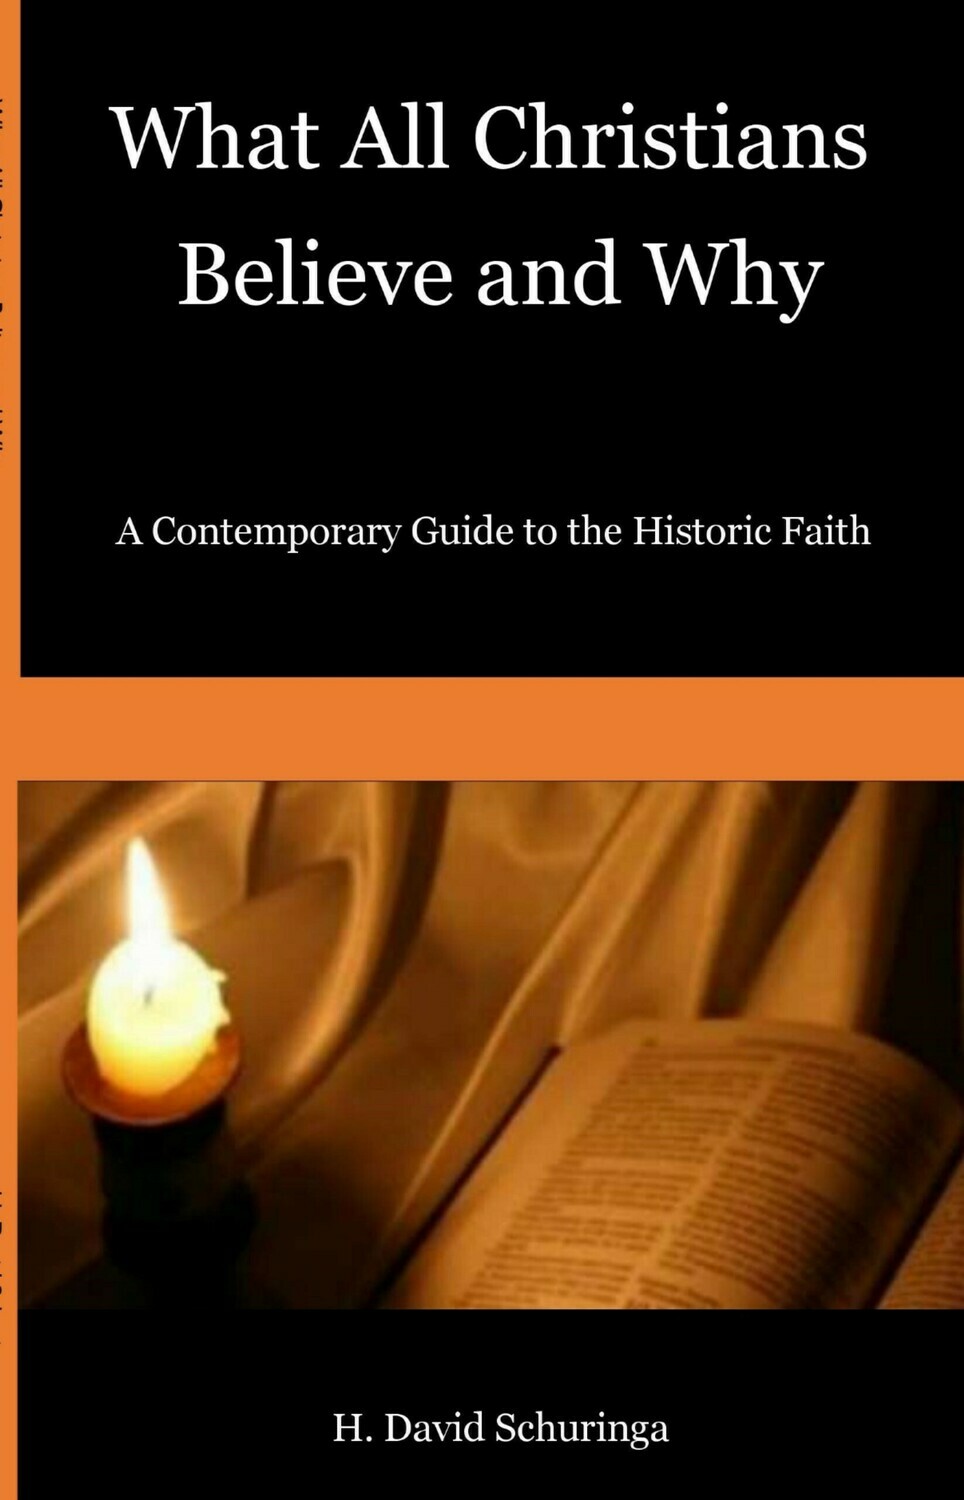 What All Christians Believe and Why: A Contemporary Guide to the Historic Faith by H. David Schuringa (Soft-Cover & E-Book)